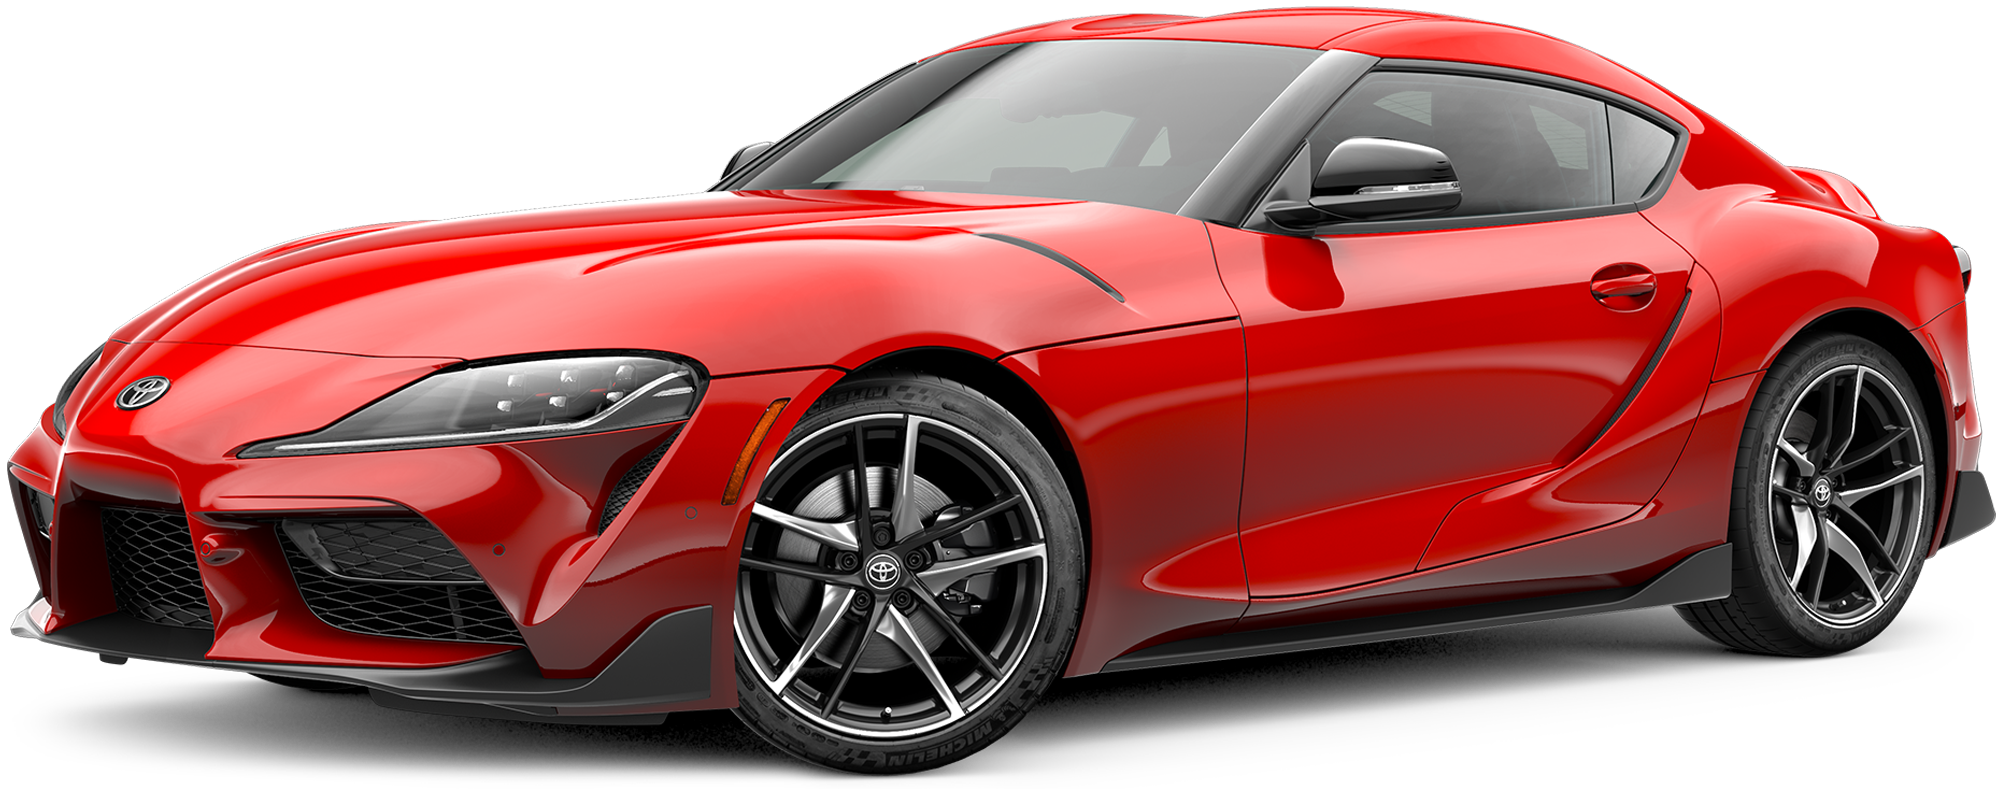 Toyota Supra 2020 PNG Picture